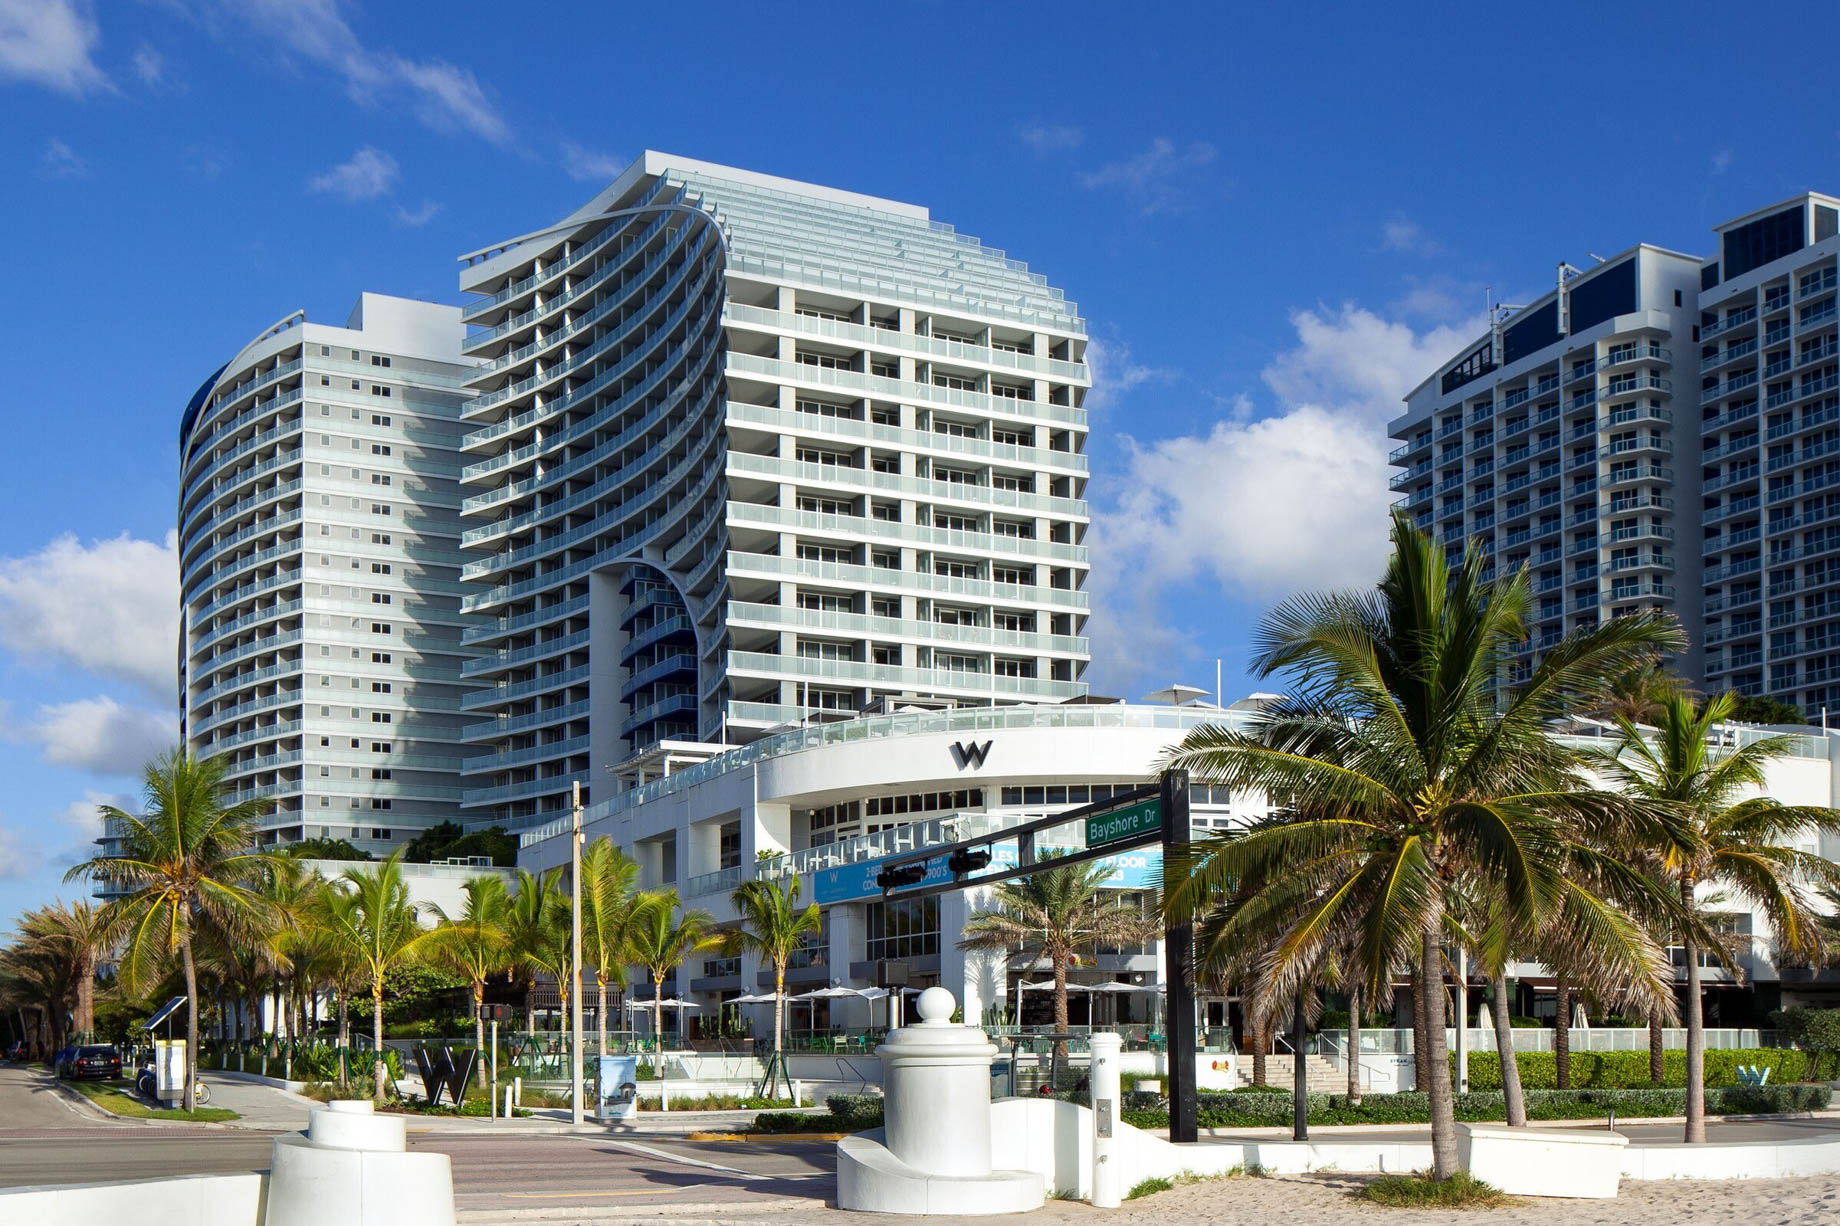 W Fort Lauderdale Luxury Hotel - Fort Lauderdale, FL, USA - Hotel Exterior